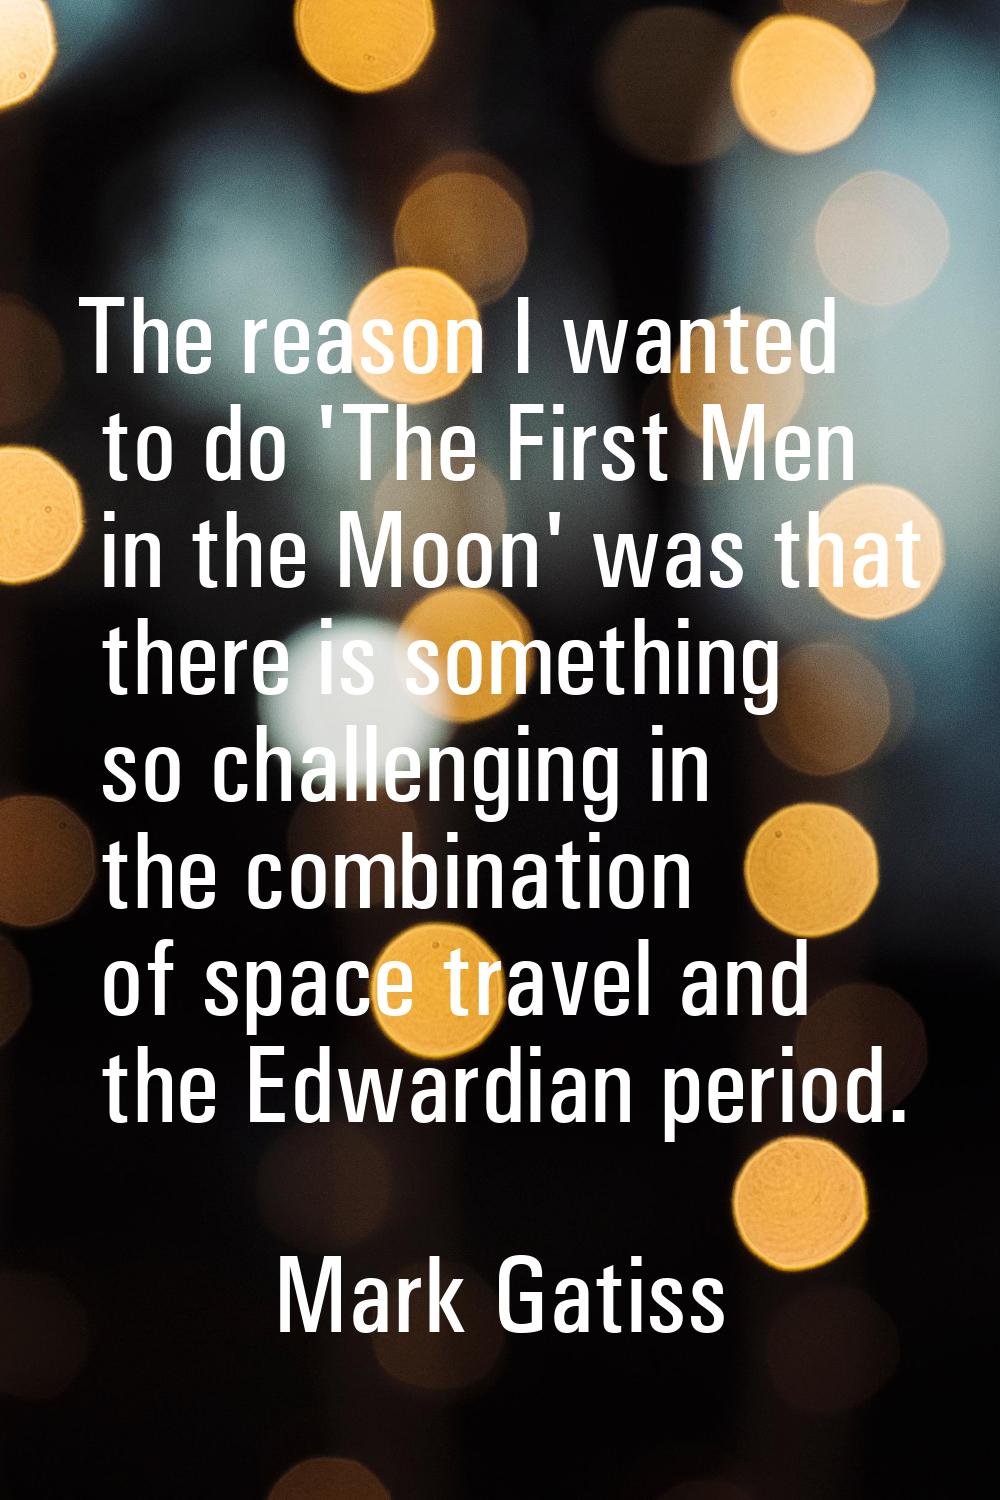 The reason I wanted to do 'The First Men in the Moon' was that there is something so challenging in